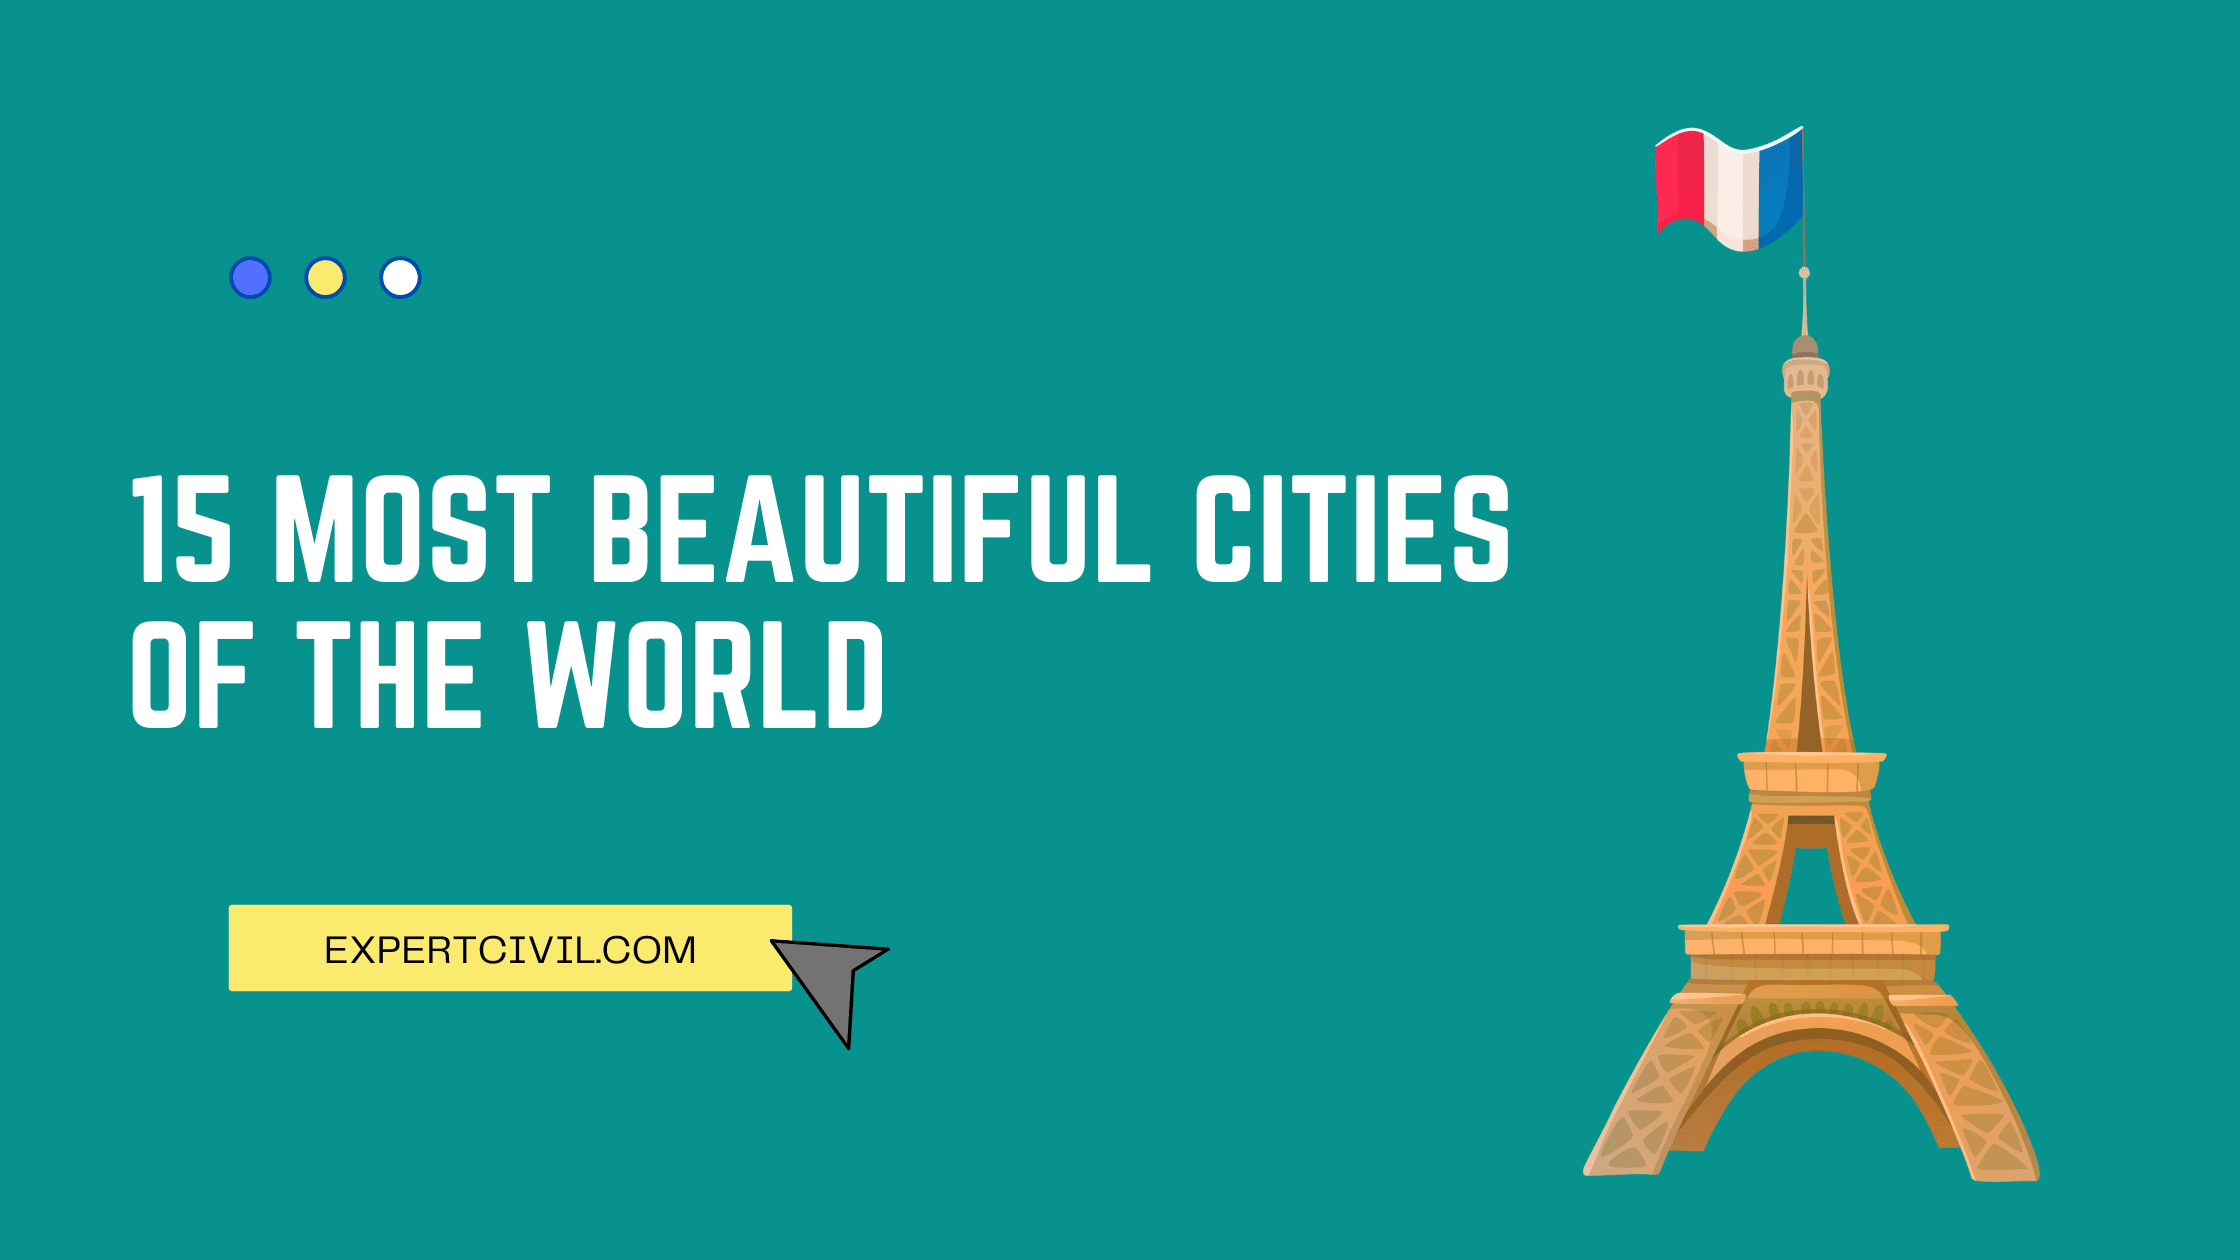 Top 15 Most Beautiful Cities of the World